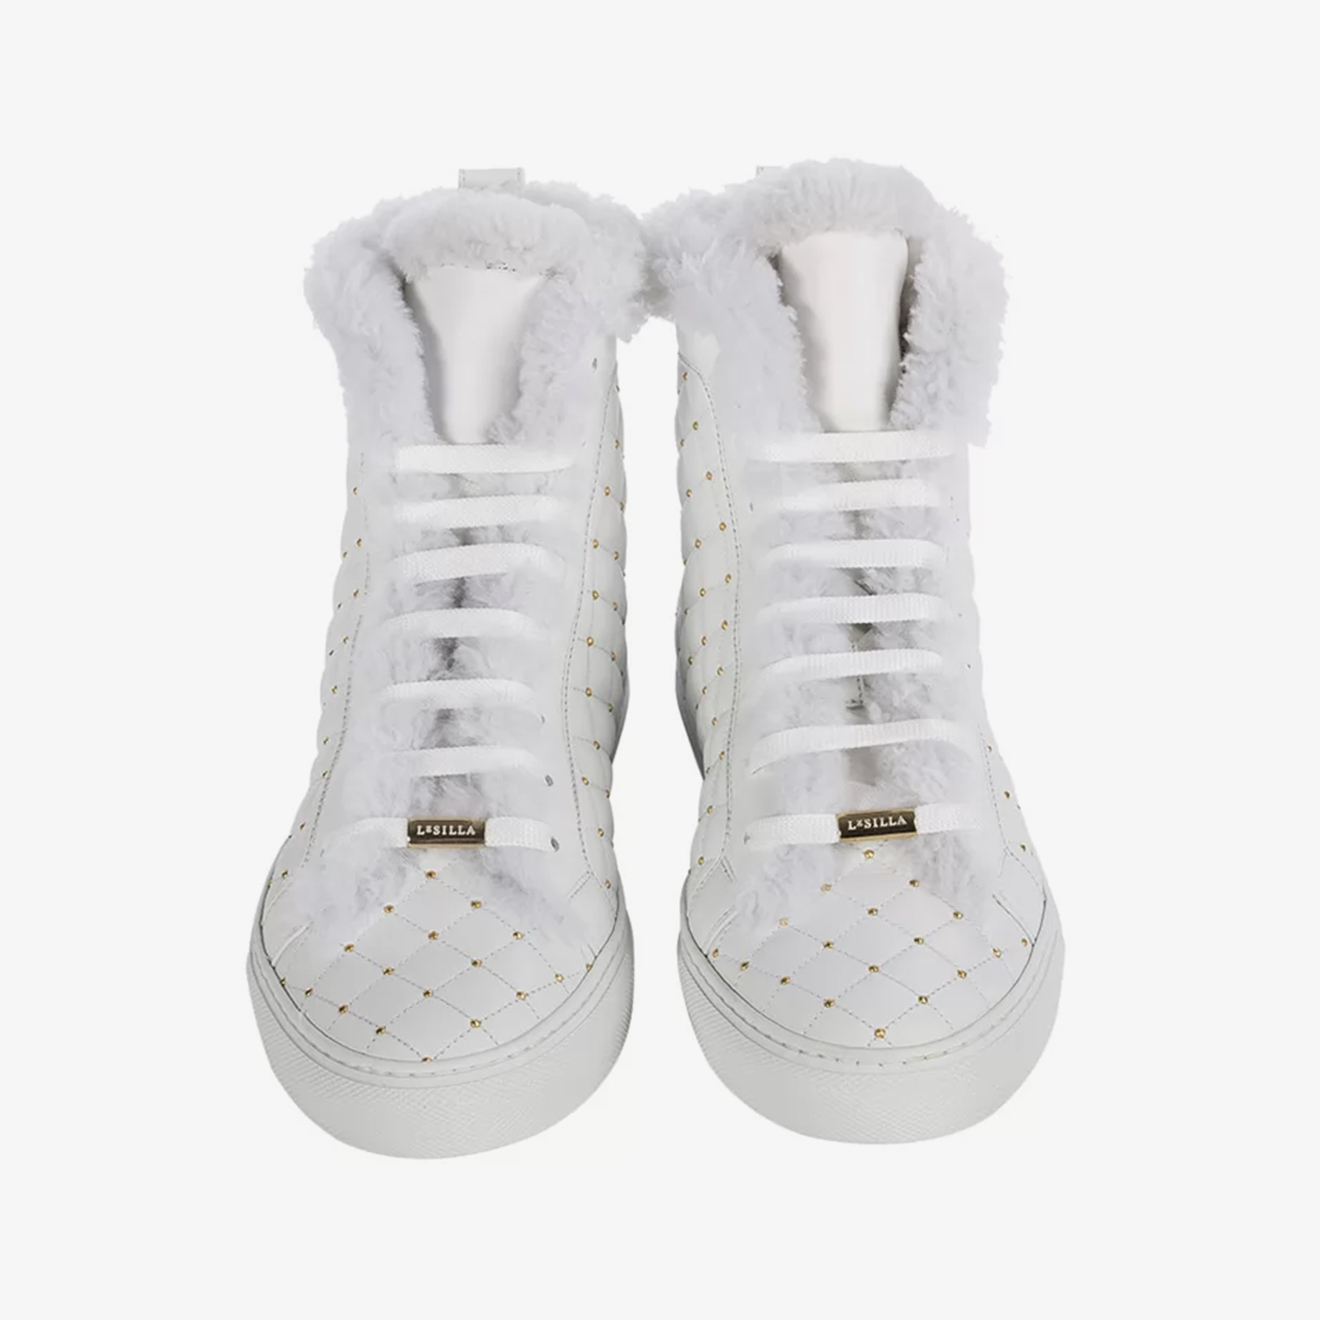 KATE SNEAKER fur inner lining - Le Silla official outlet